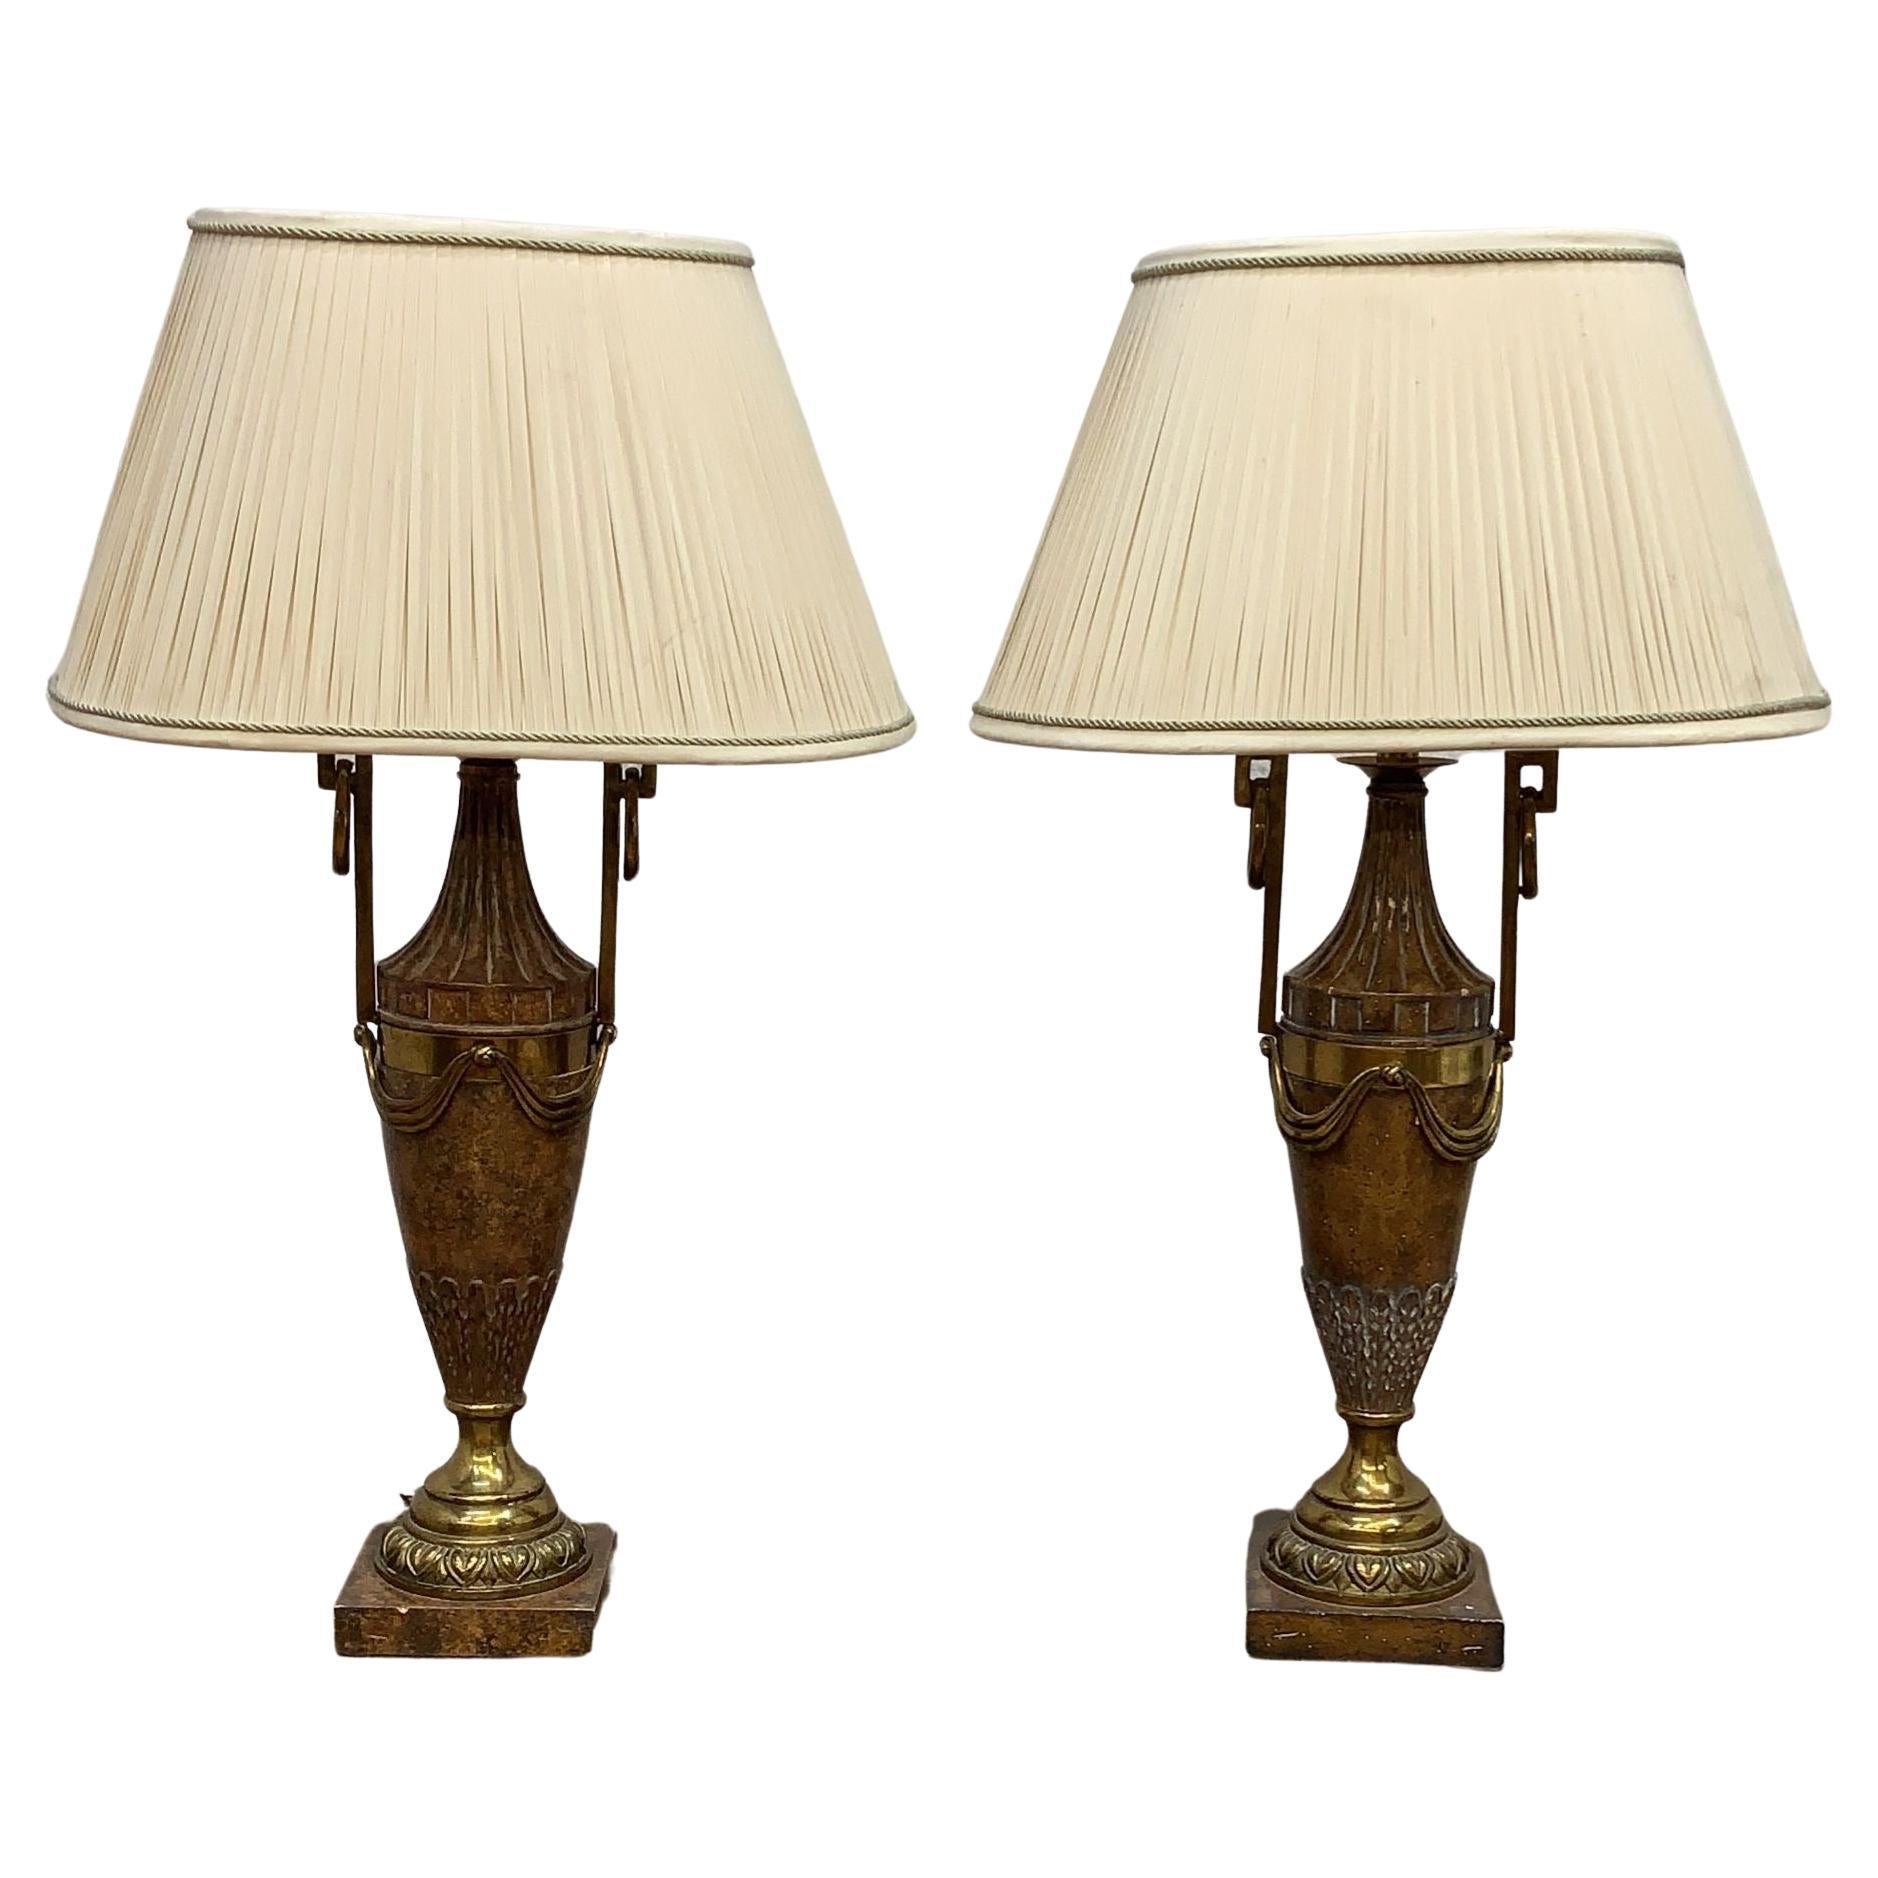 Vintage Maitland Smith French Neoclassical Bronze Urn Table Lamps - Pair For Sale